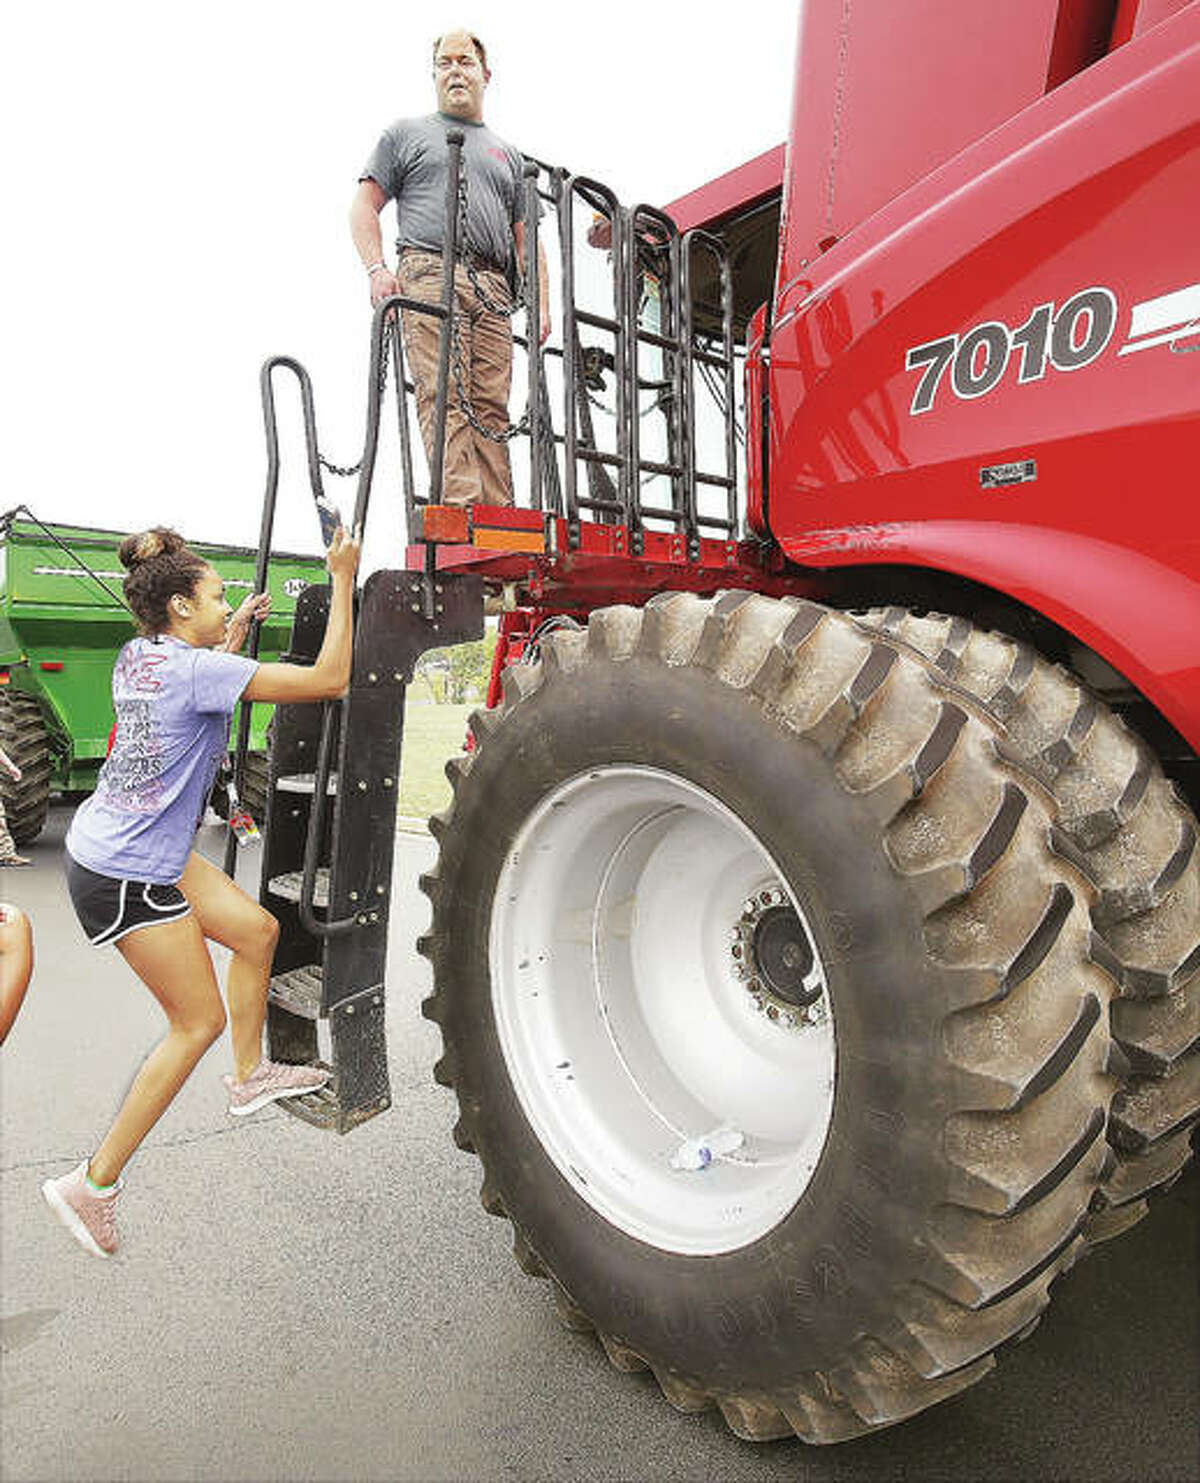 An Alton High School student makes her way up the ladder to a farm combine Wednesday operated by Nick Koeller, above, from Koeller Bros. Inc. farms in Godfrey, during a hands-on lesson for students about farm implement safety and driving. Various students in agricultural and driver’s education classes learned about the equipment and the visibility limitation of drivers on the road. Students were particularly shown blind spots and turn signal systems during their tours of three large farm implements.